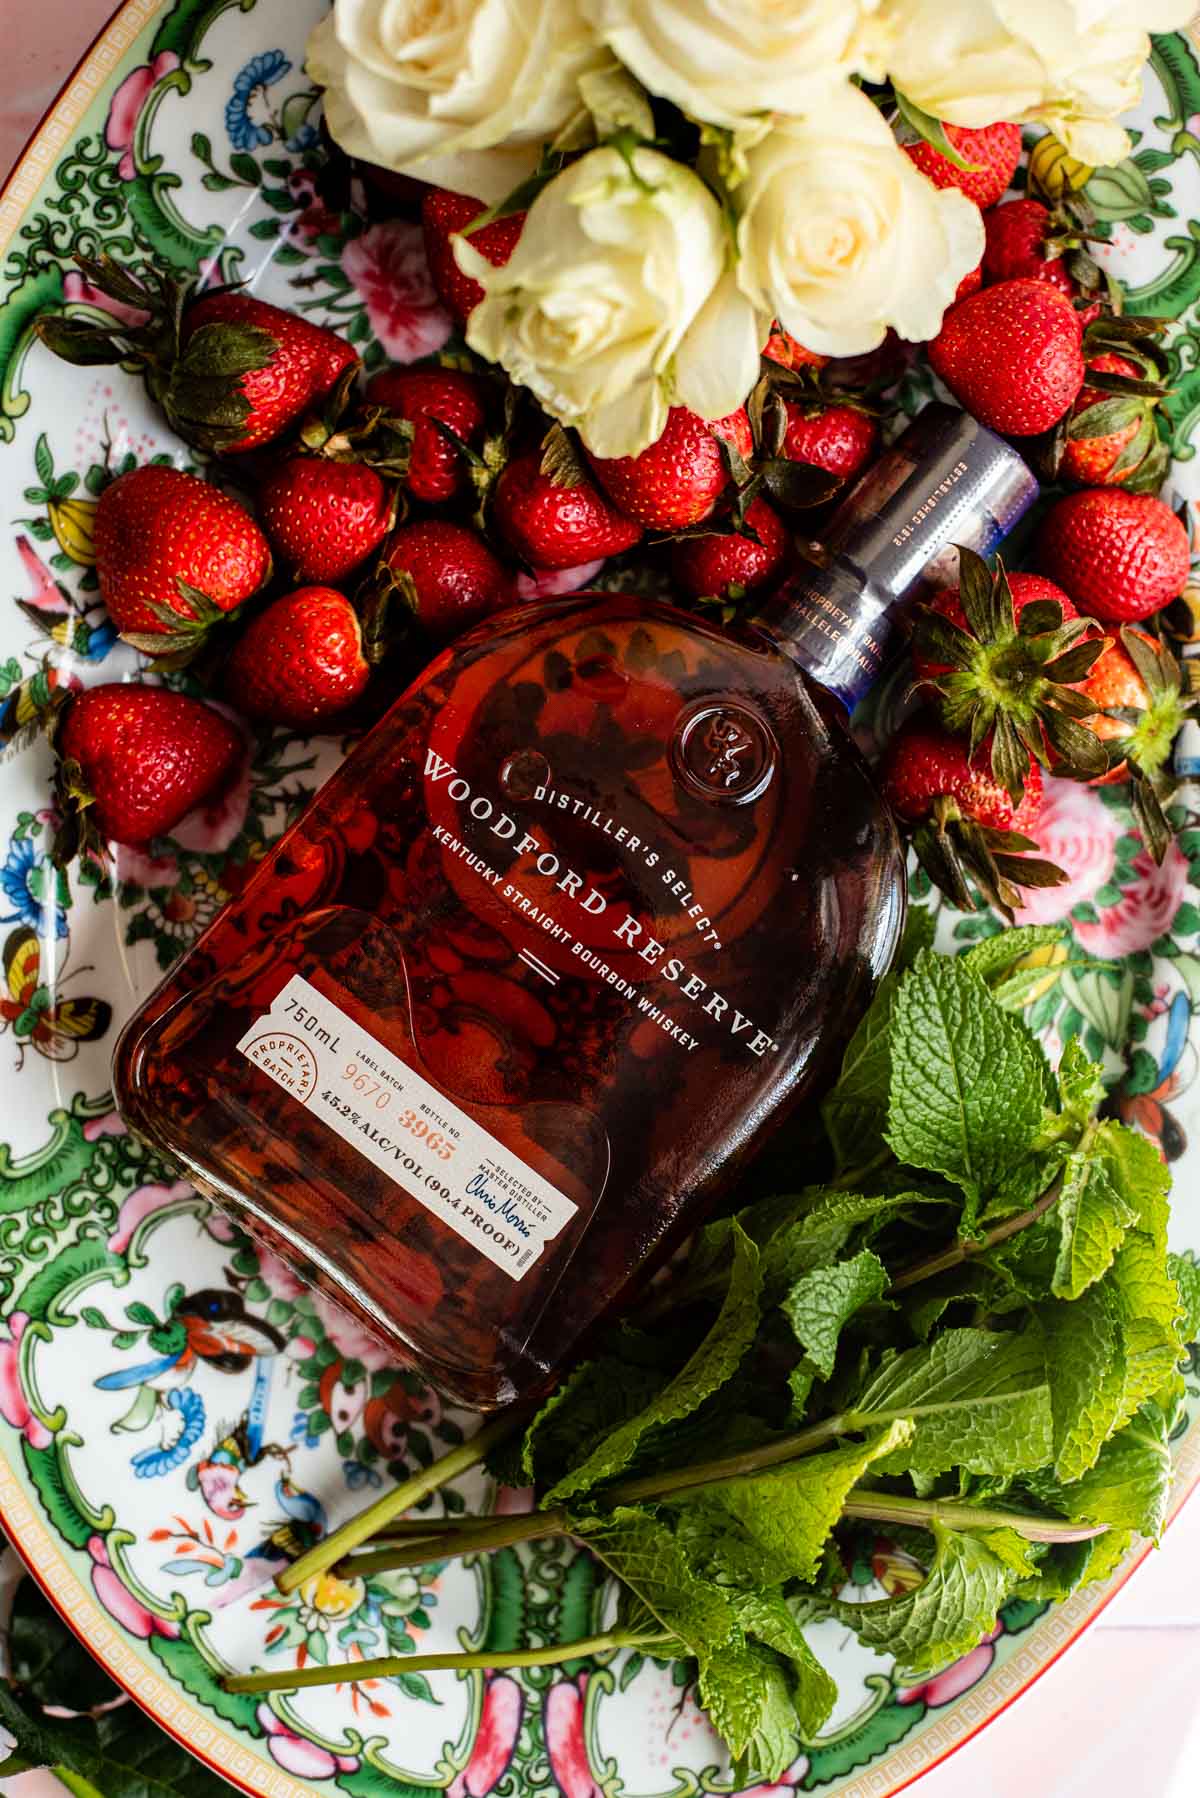 Strawberries, mint, and a handle of Woodford Reserve bourbon on a pink and green serving platter.